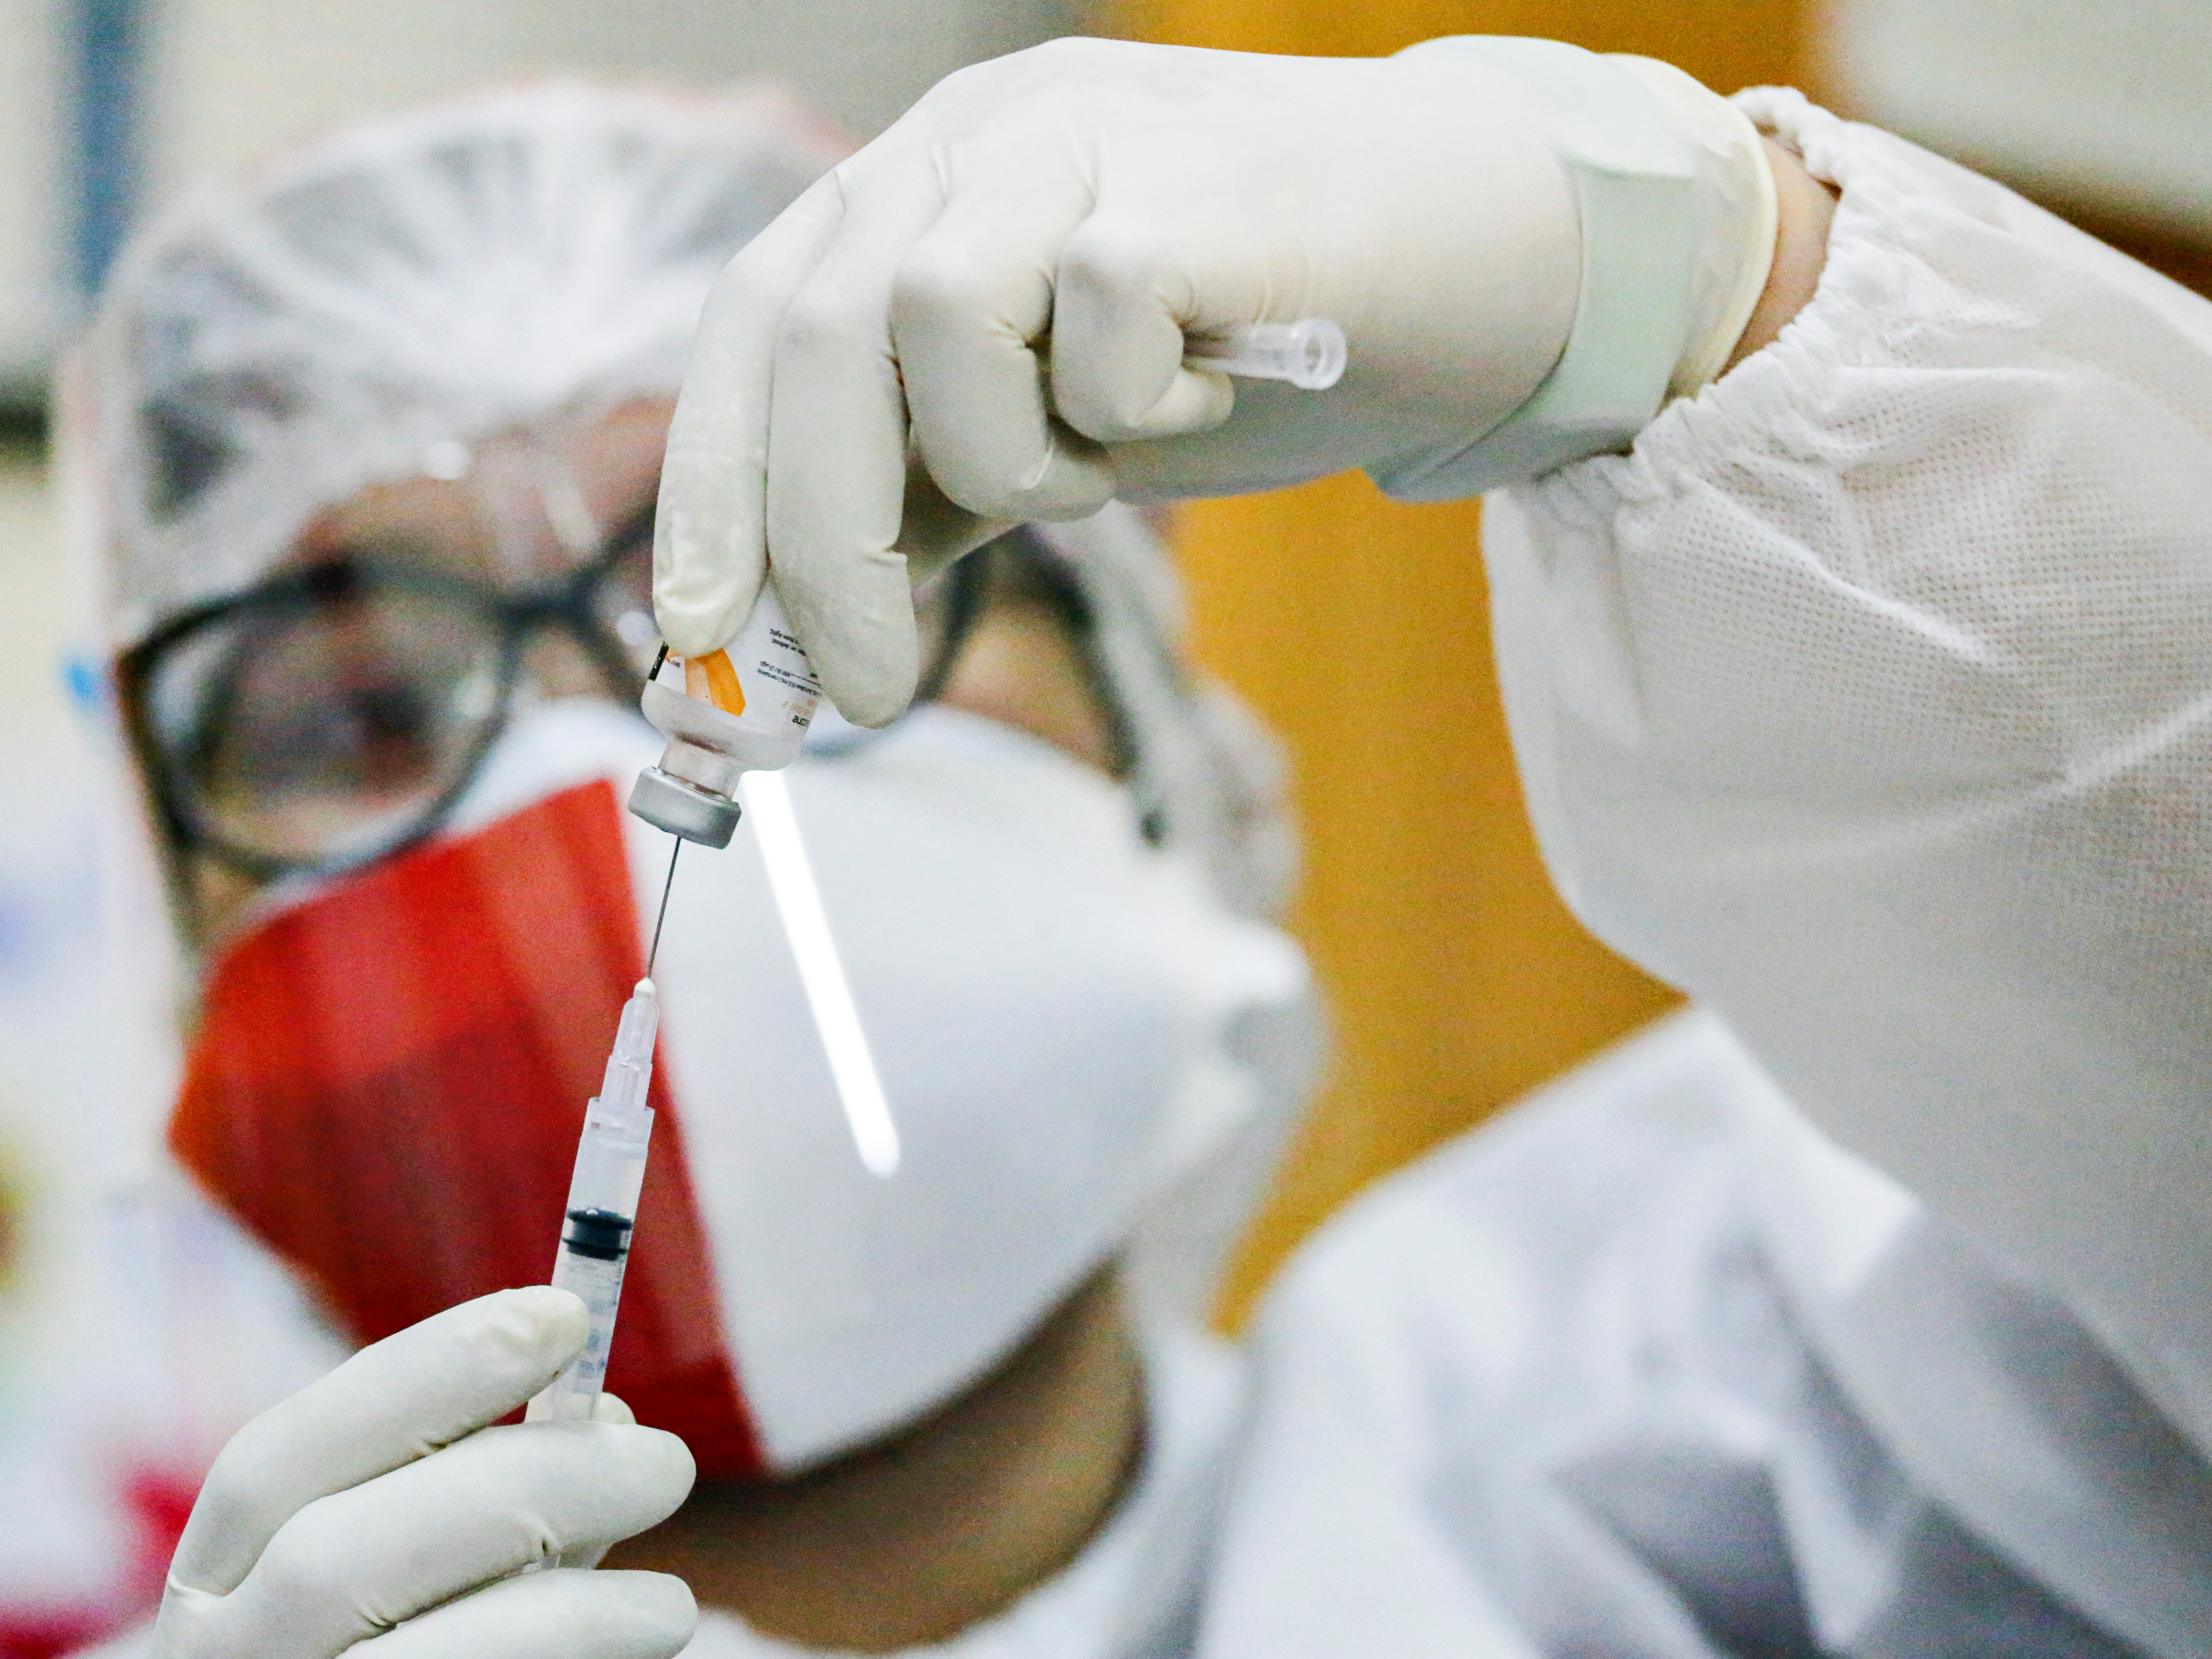 A healthcare worker wearing an Indonesian flag mask to mark the country's 76th Independence Day, prepares a dose of China's Sinovac Biotech vaccine against the coronavirus disease (COVID-19) during a mass vaccination program in Jakarta, Indonesia, August 17, 2021. REUTERS/Ajeng Dinar Ulfiana